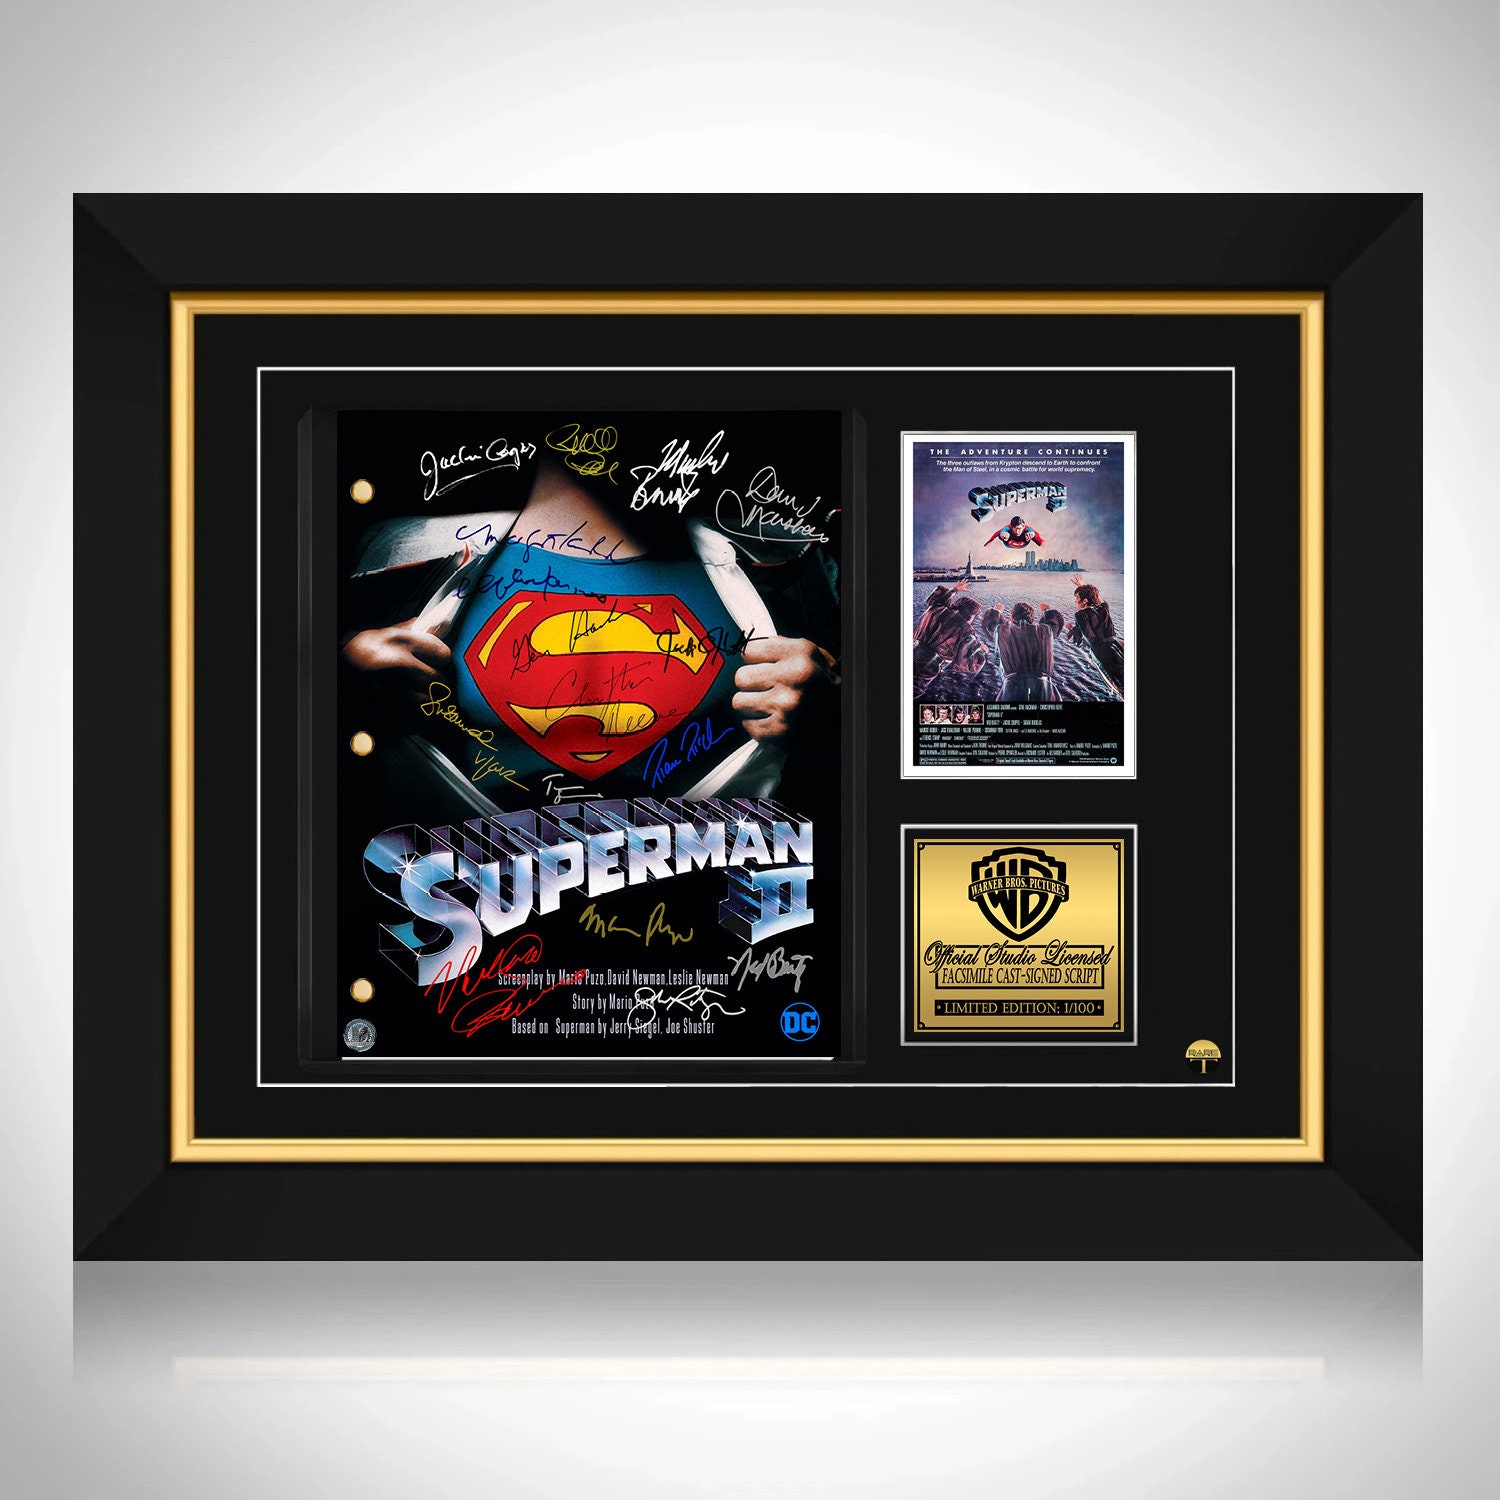 Man Of Steel Super Man Henry Cavill Limited Print Photo Movie Poster 8x10  #11